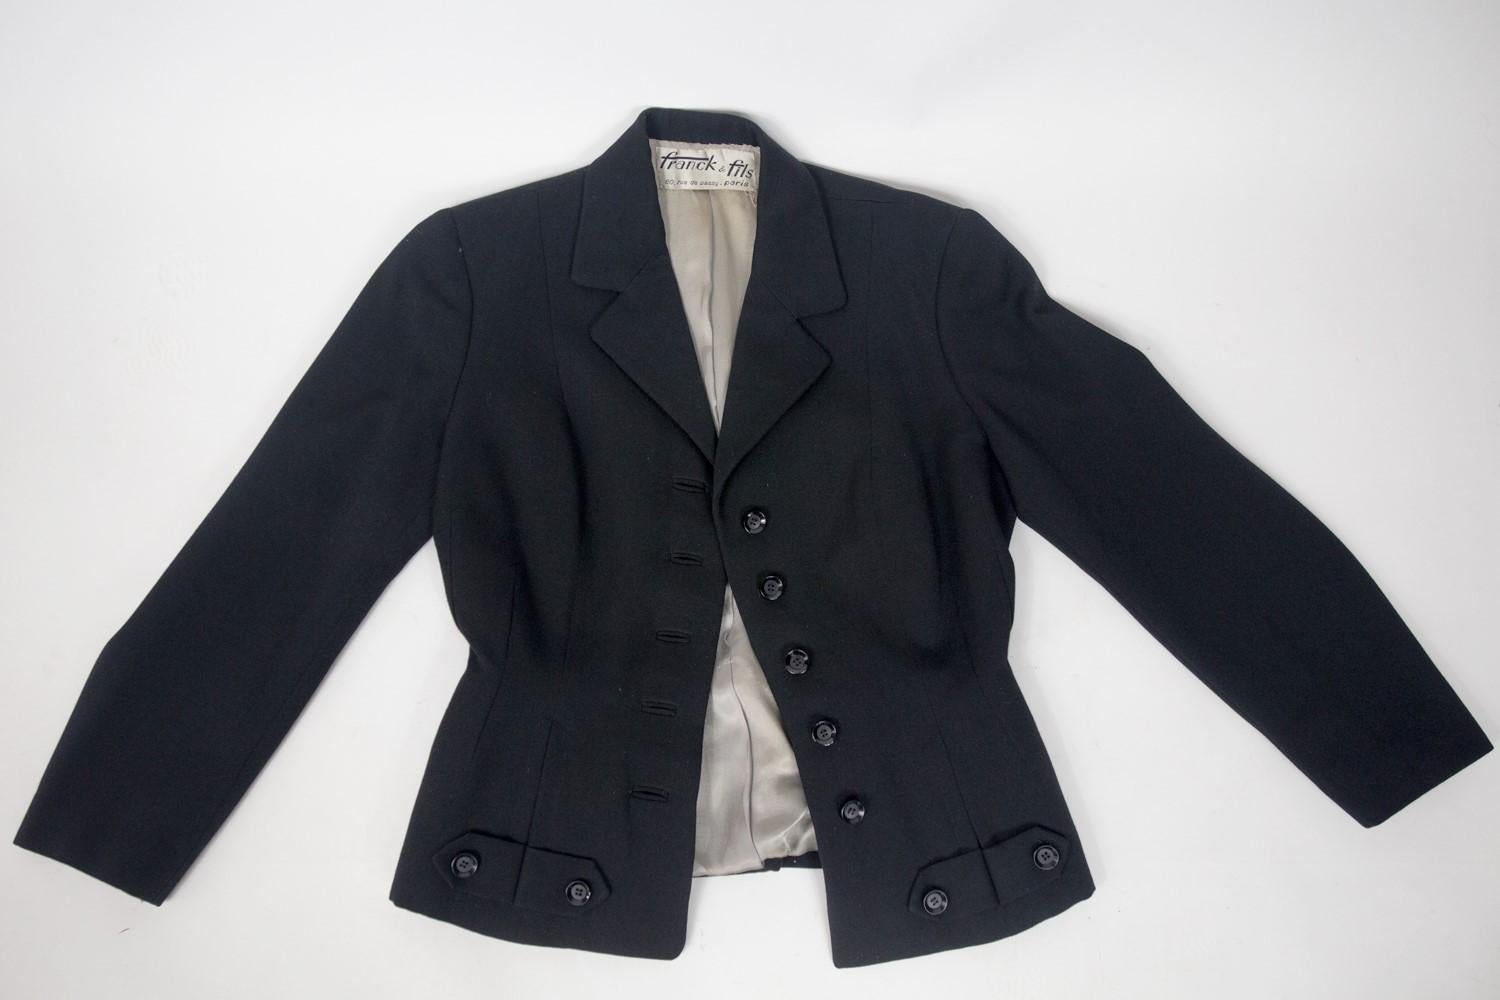 Circa 1945/1950
Paris France

Bar skirt suit by Franck & Fils in black woolen cloth in the tradition of Christian Dior's New Look and dating from the end of the 1940s. Fitted jacket with structured cut and marked waist hugging the hips. Crossed